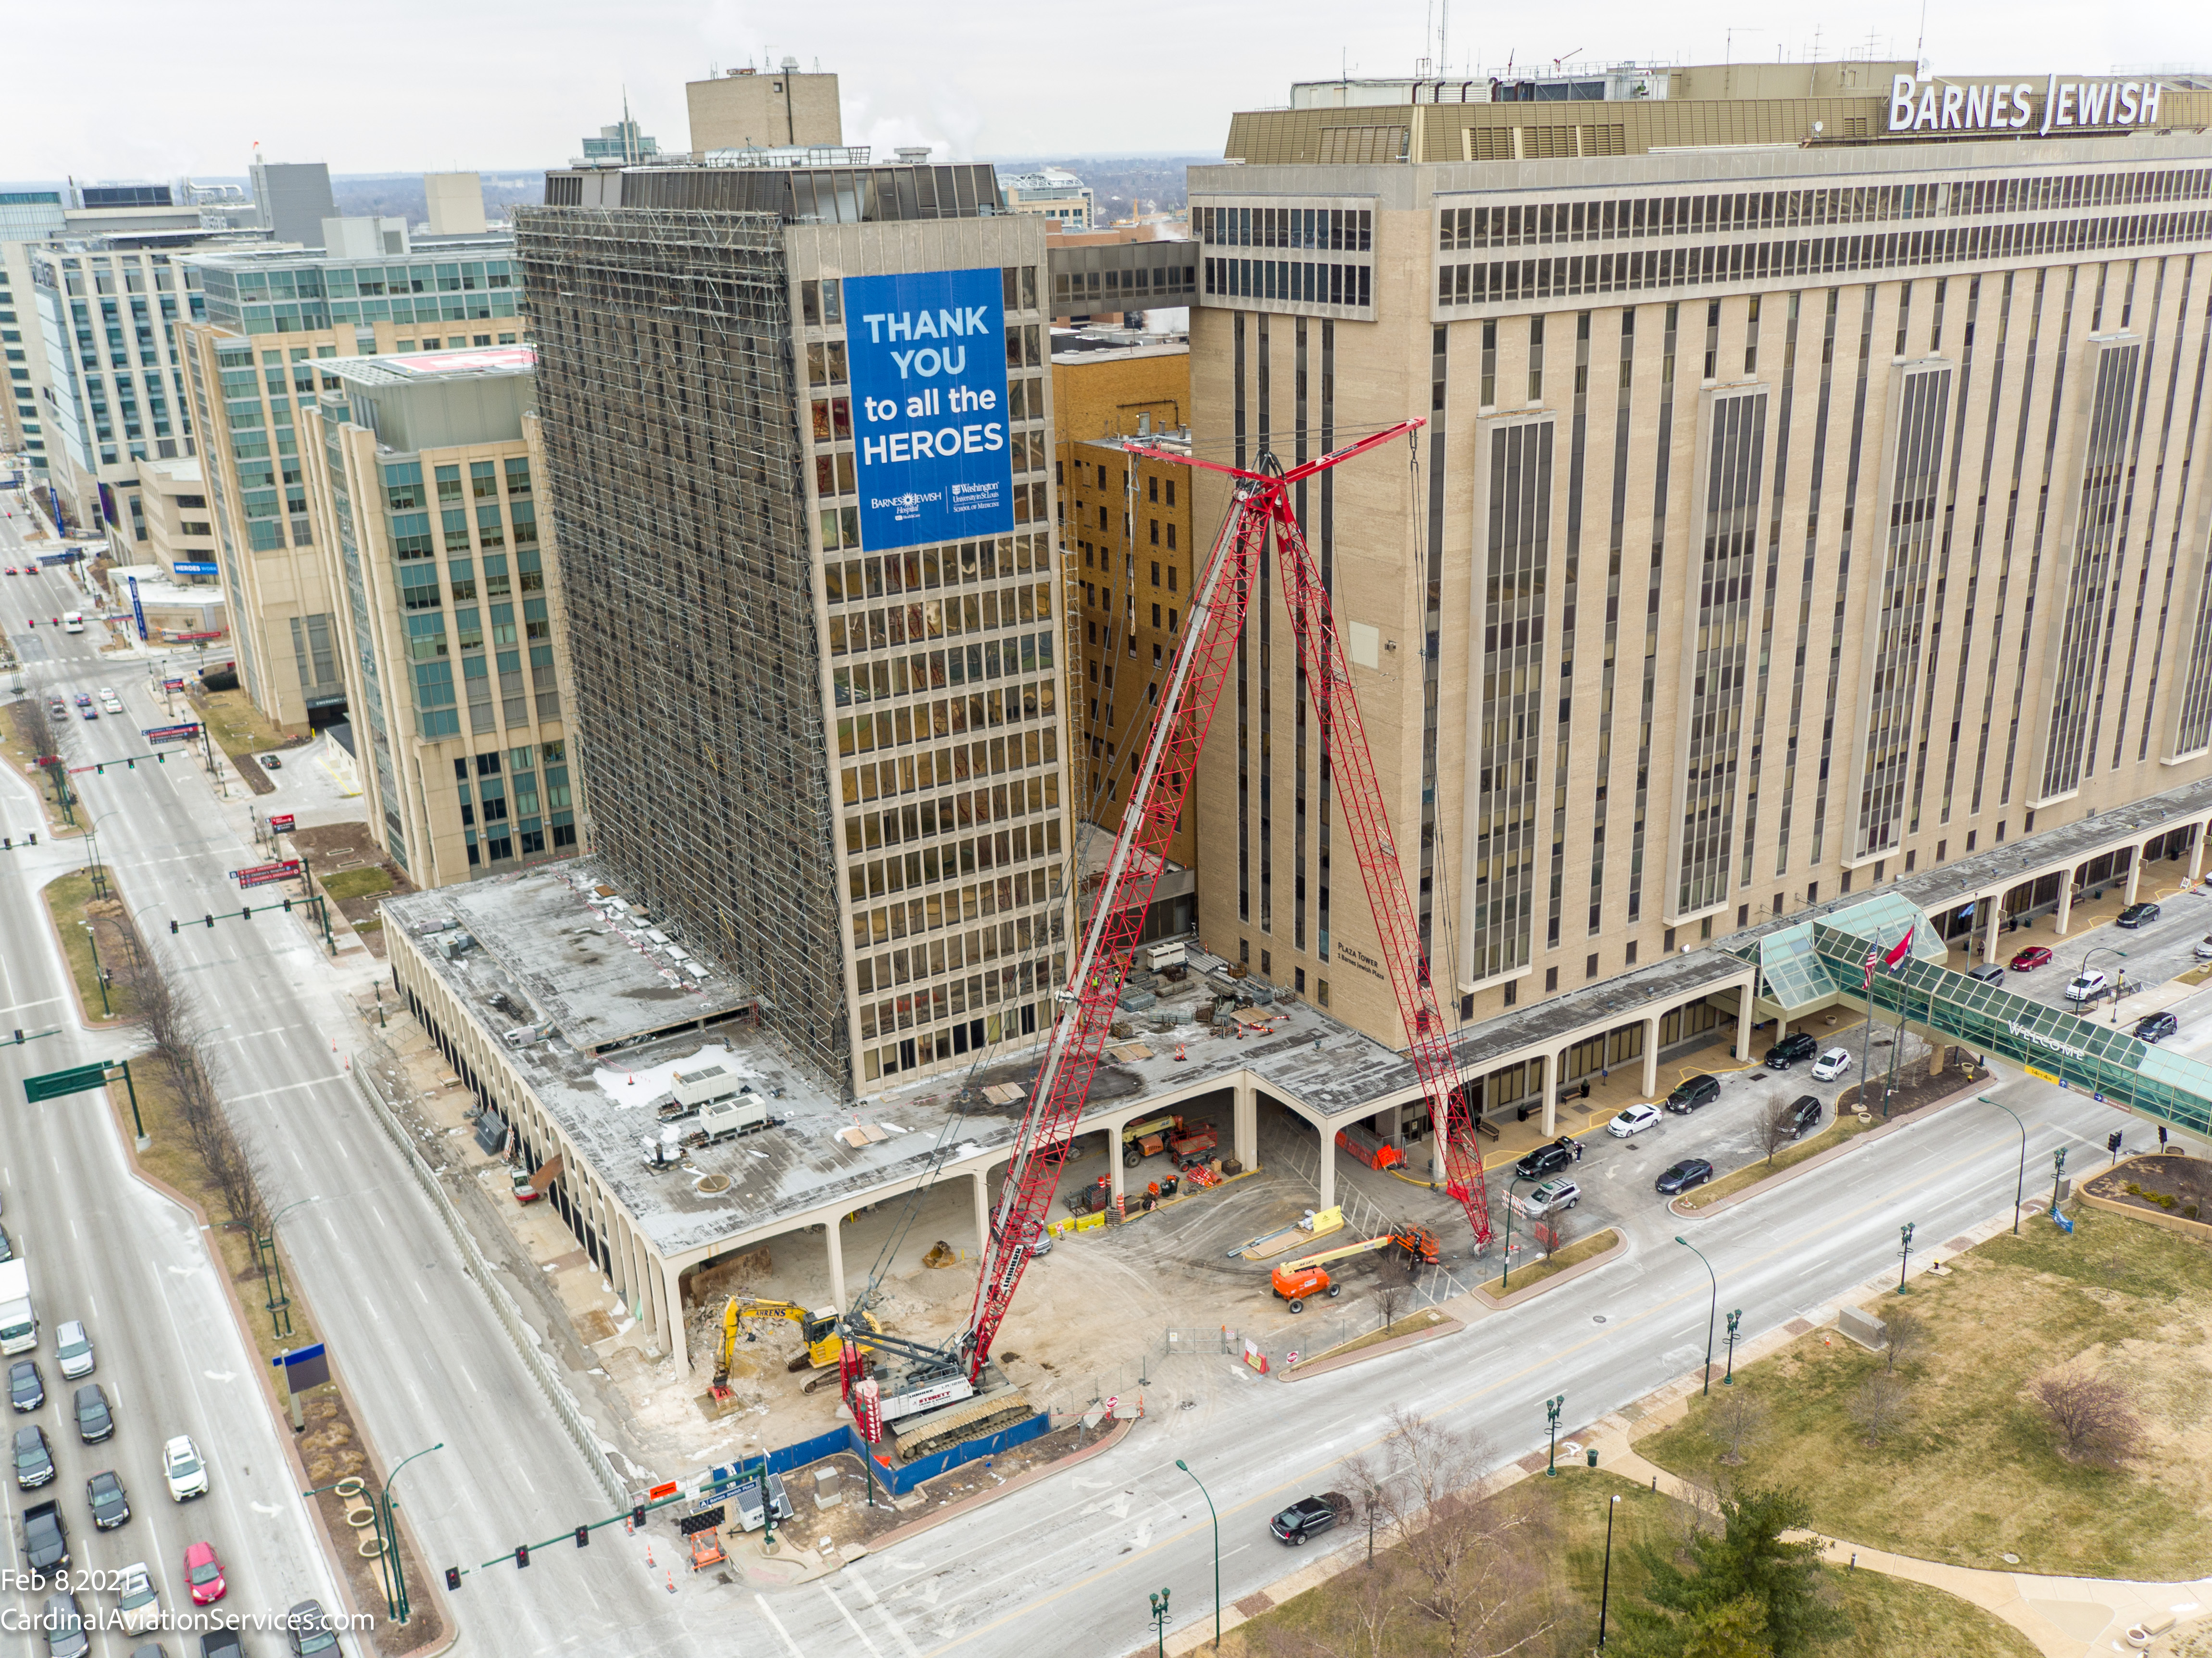 The 18-story Queeny Tower at the corner of Kingshighway and Barnes-Jewish Plaza will be a memory by the end of September 2021